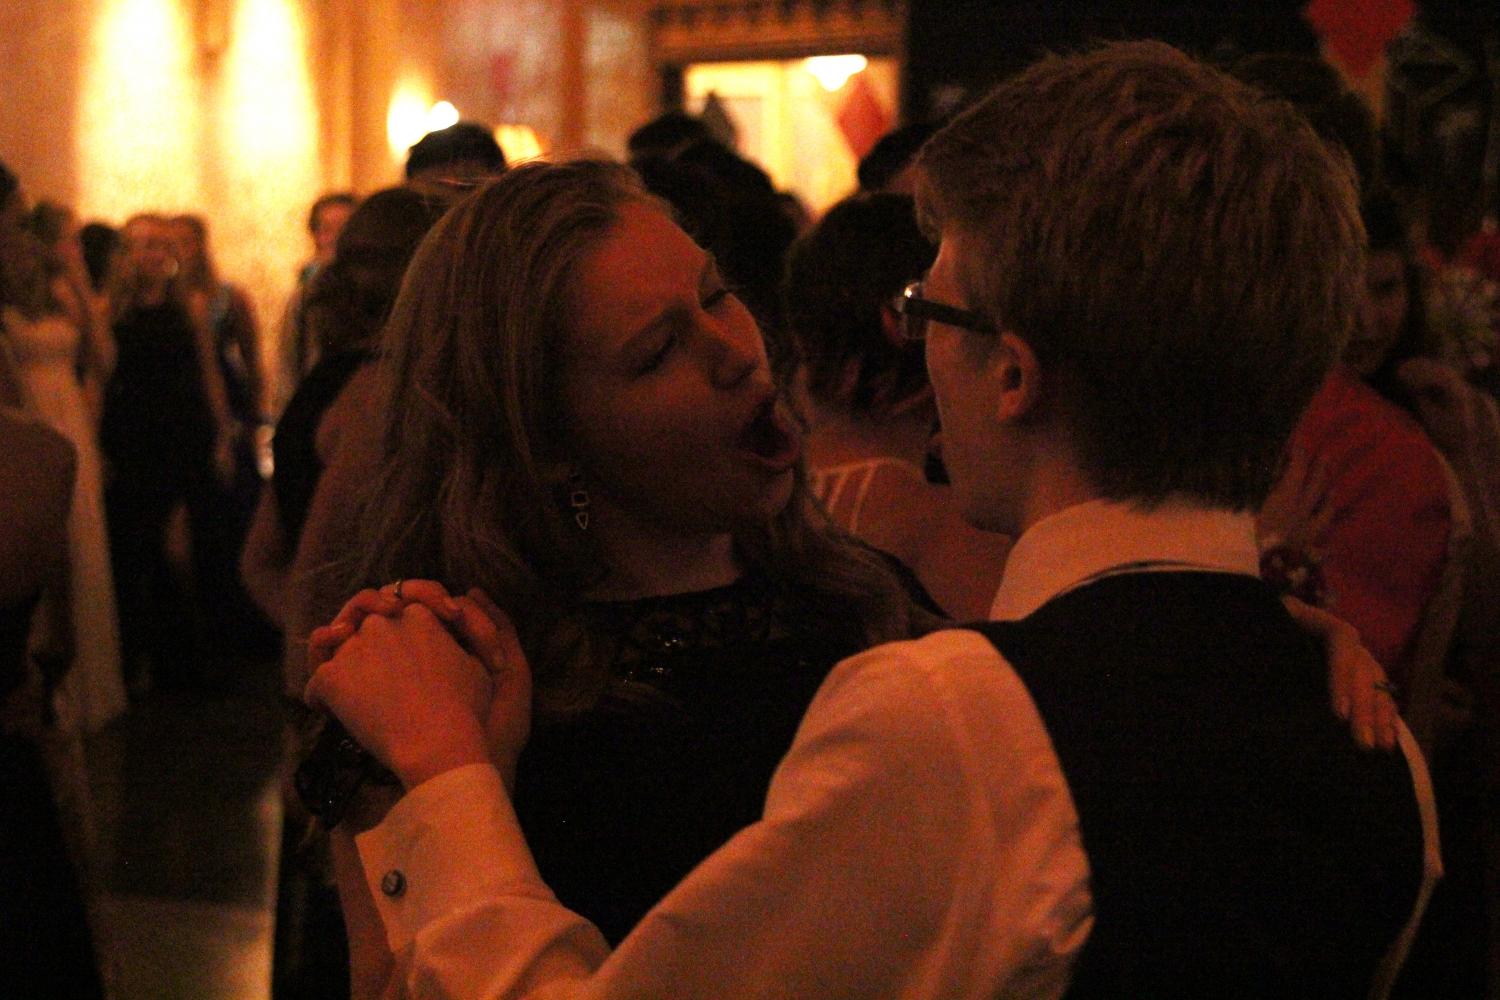 Senior Mary Petropolus sings and dances with her date at prom on Saturday, April 29.